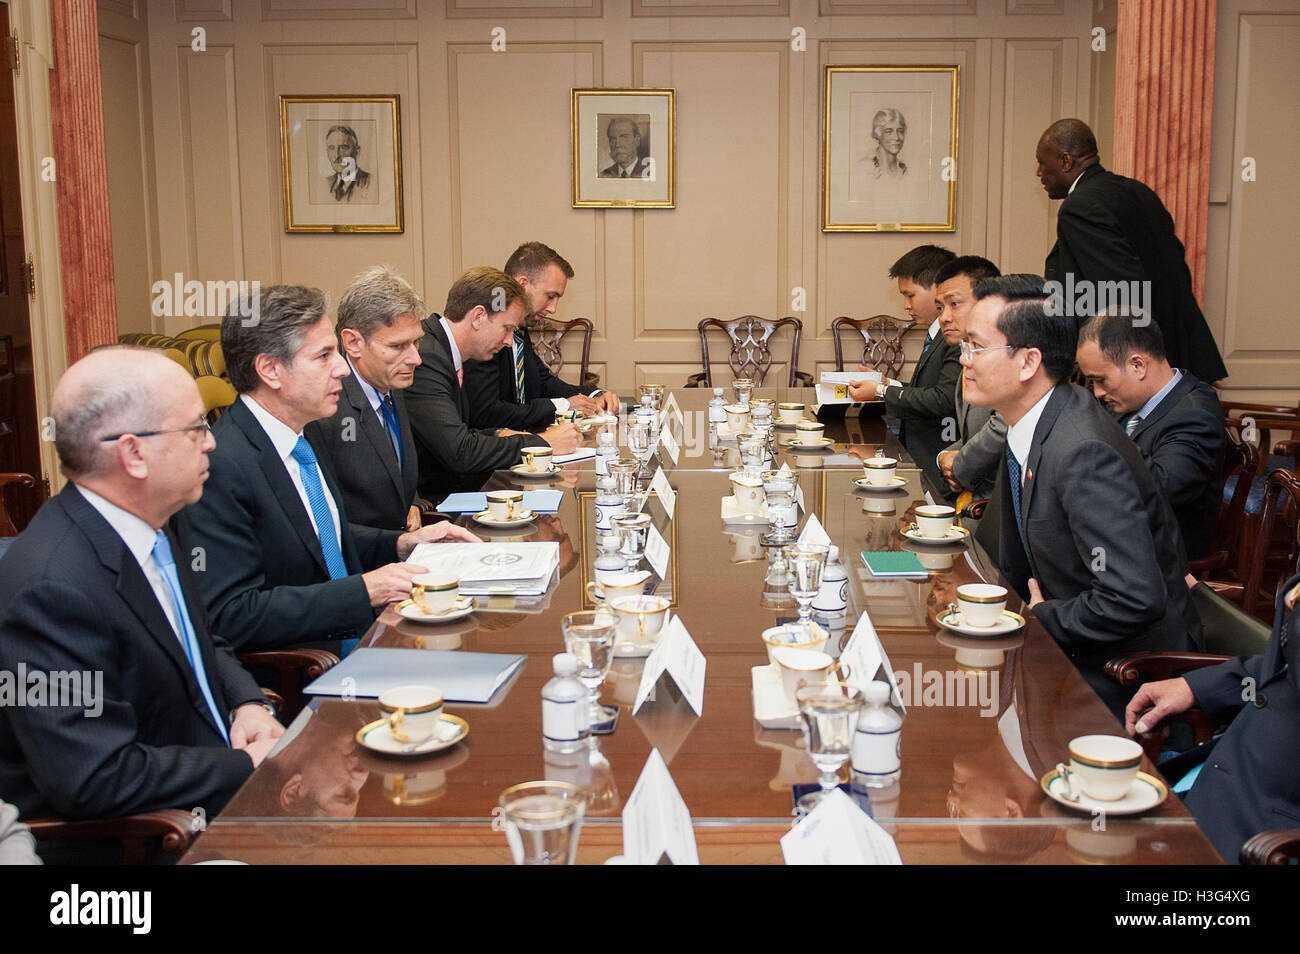 U.S. Deputy Secretary of State Antony &quot;Tony' Blinken hosts a working luncheon with Vietnam Vice Foreign Minister Ha Kim Ngoc and his counterparts at the U.S. Department of State in Washington, D.C. on August 1, 2016. Stock Photo